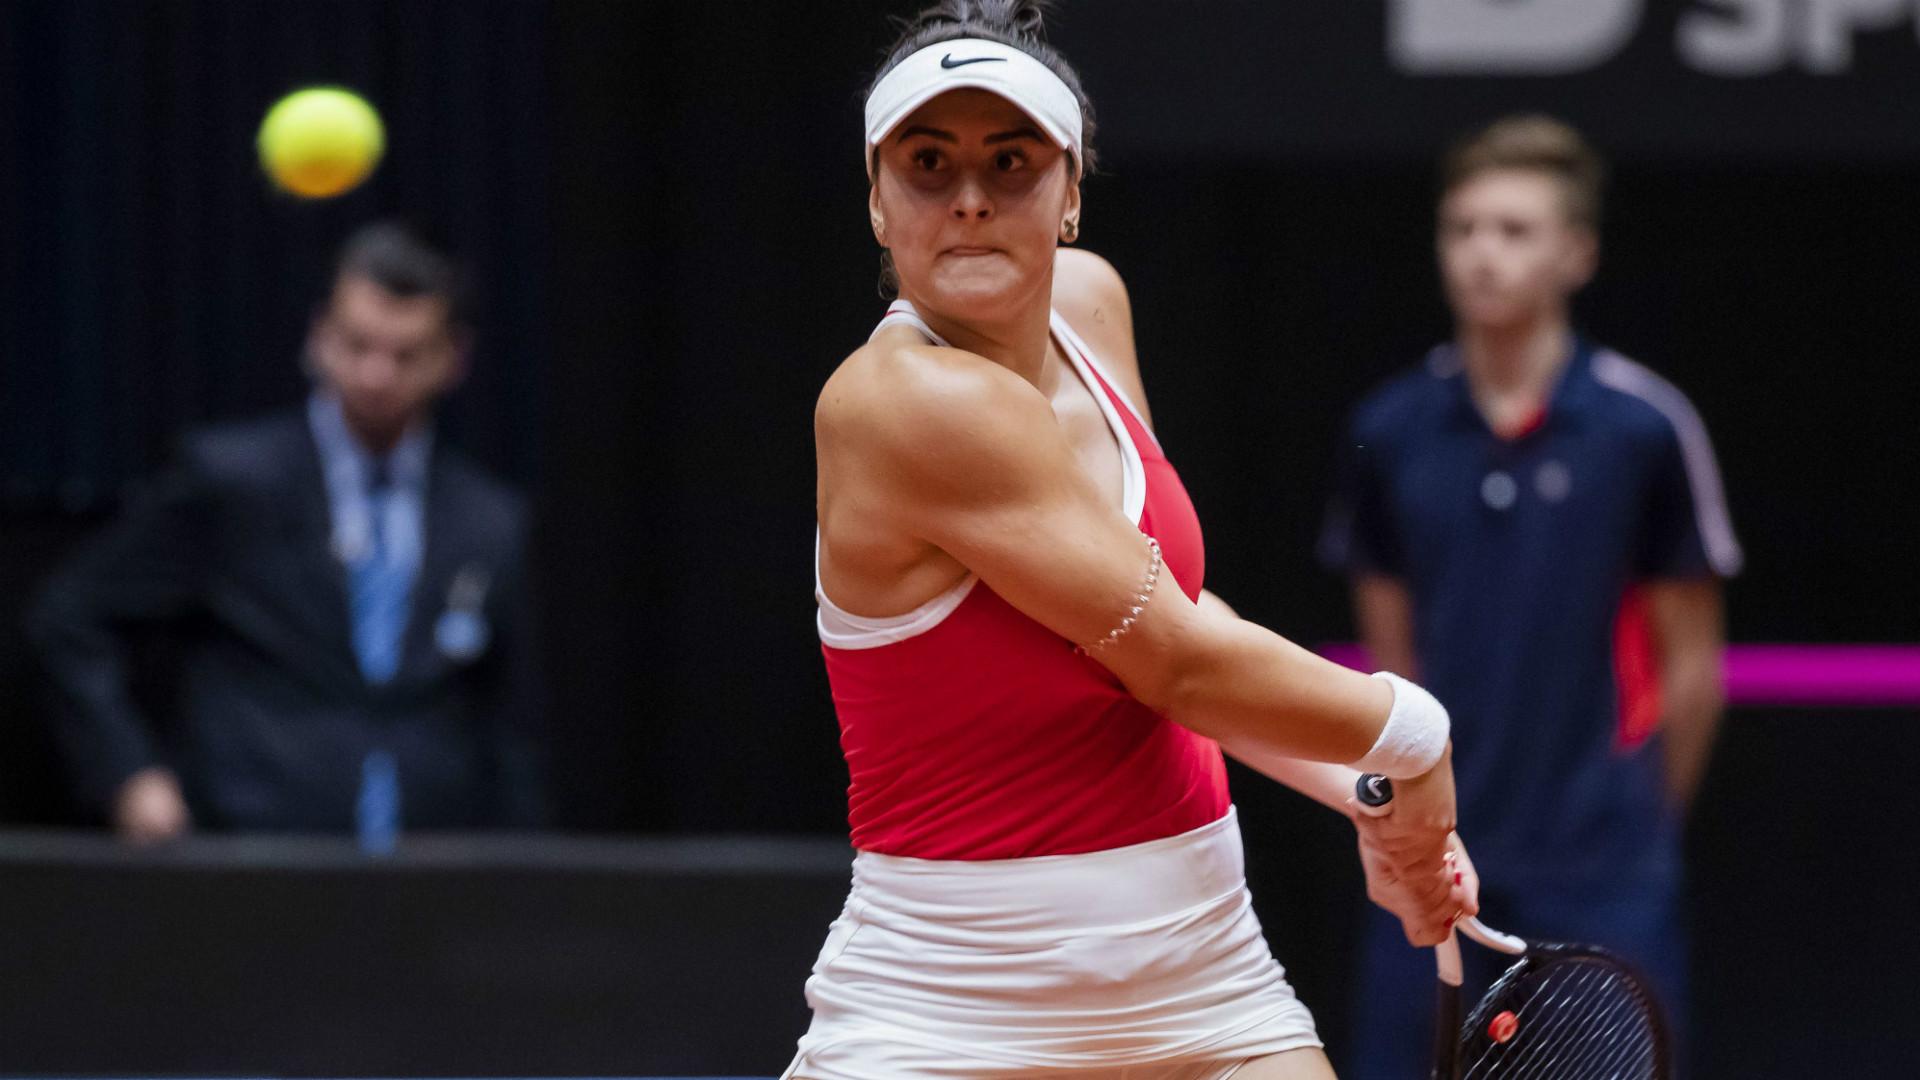 Fed Cup 2019: Canada Up 2 0 On Netherlands After Wins By Bianca